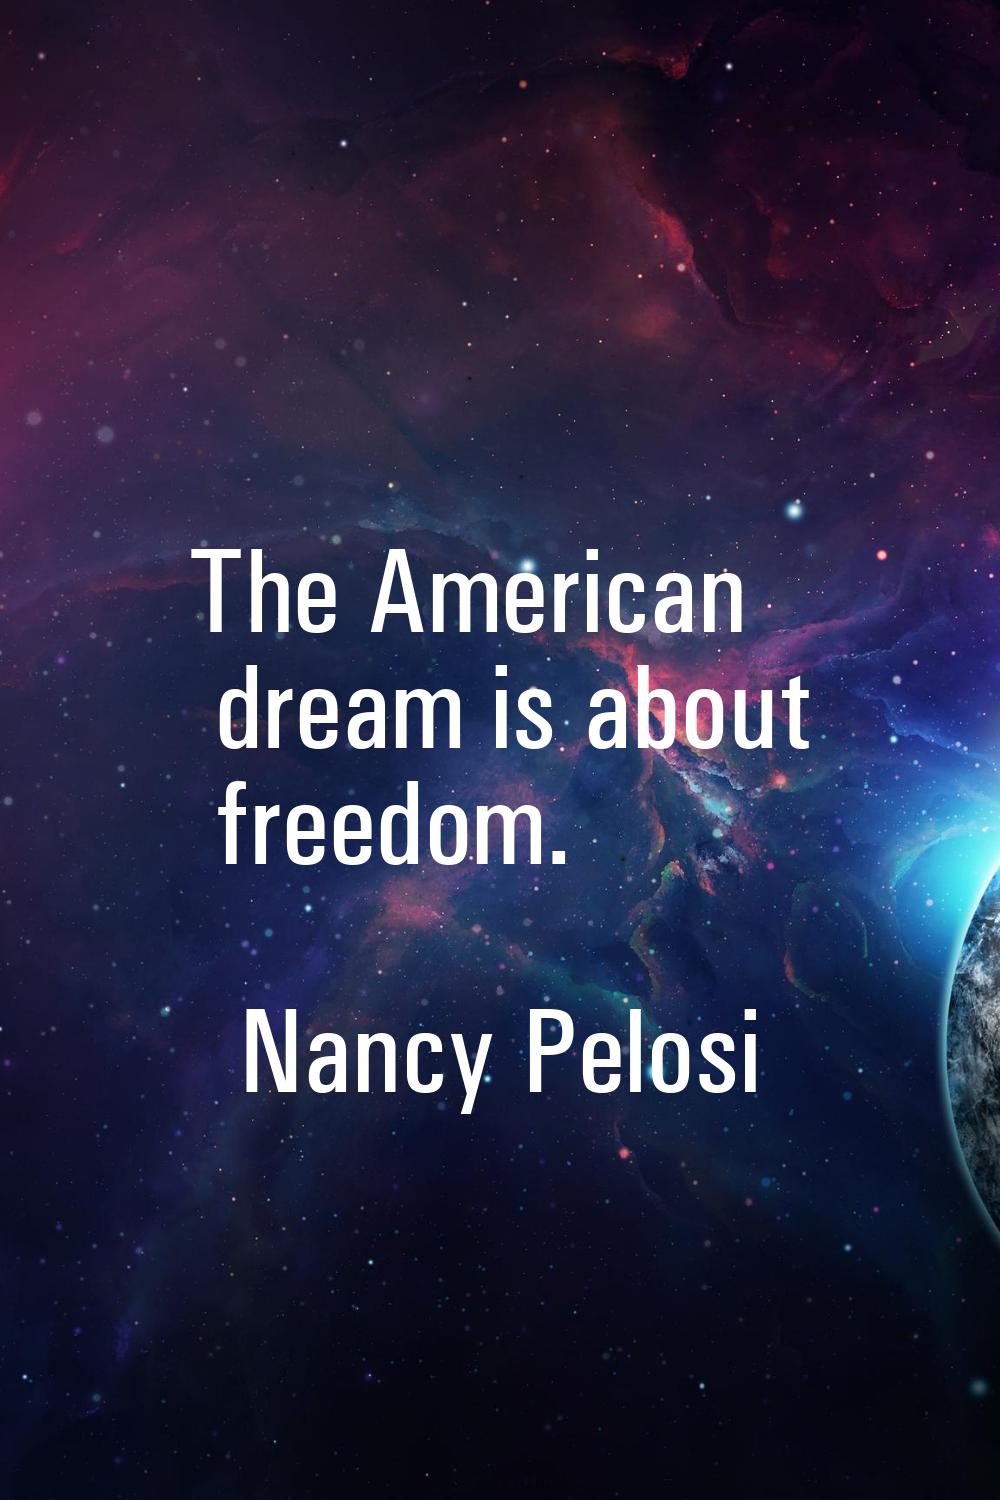 The American dream is about freedom.